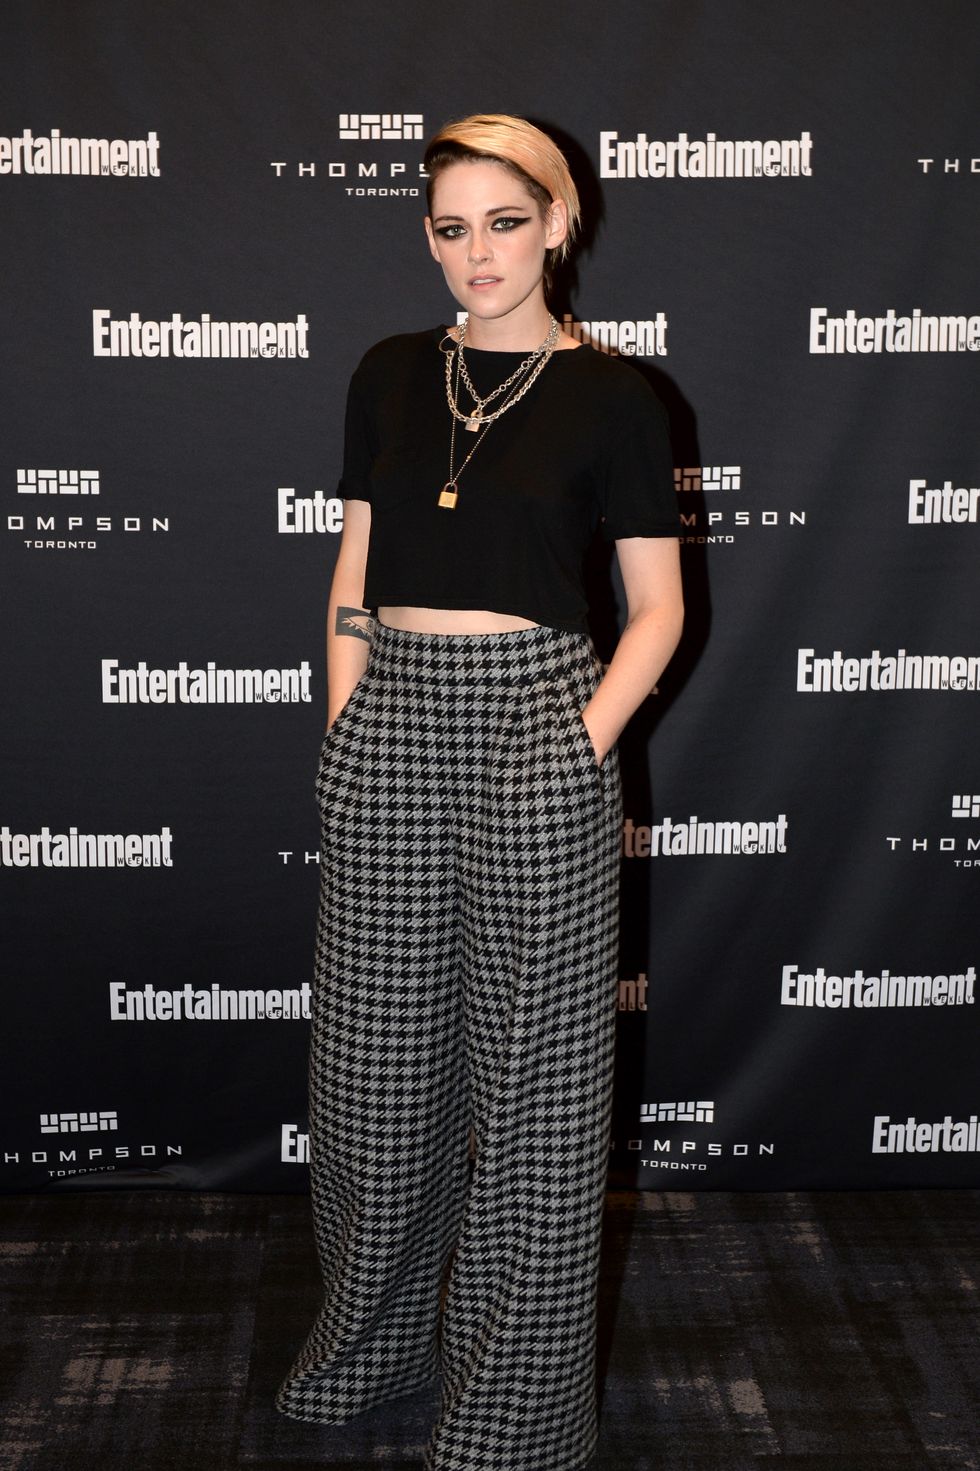 entertainment weekly's must list party at the toronto international film festival 2019 at the thompson hotel